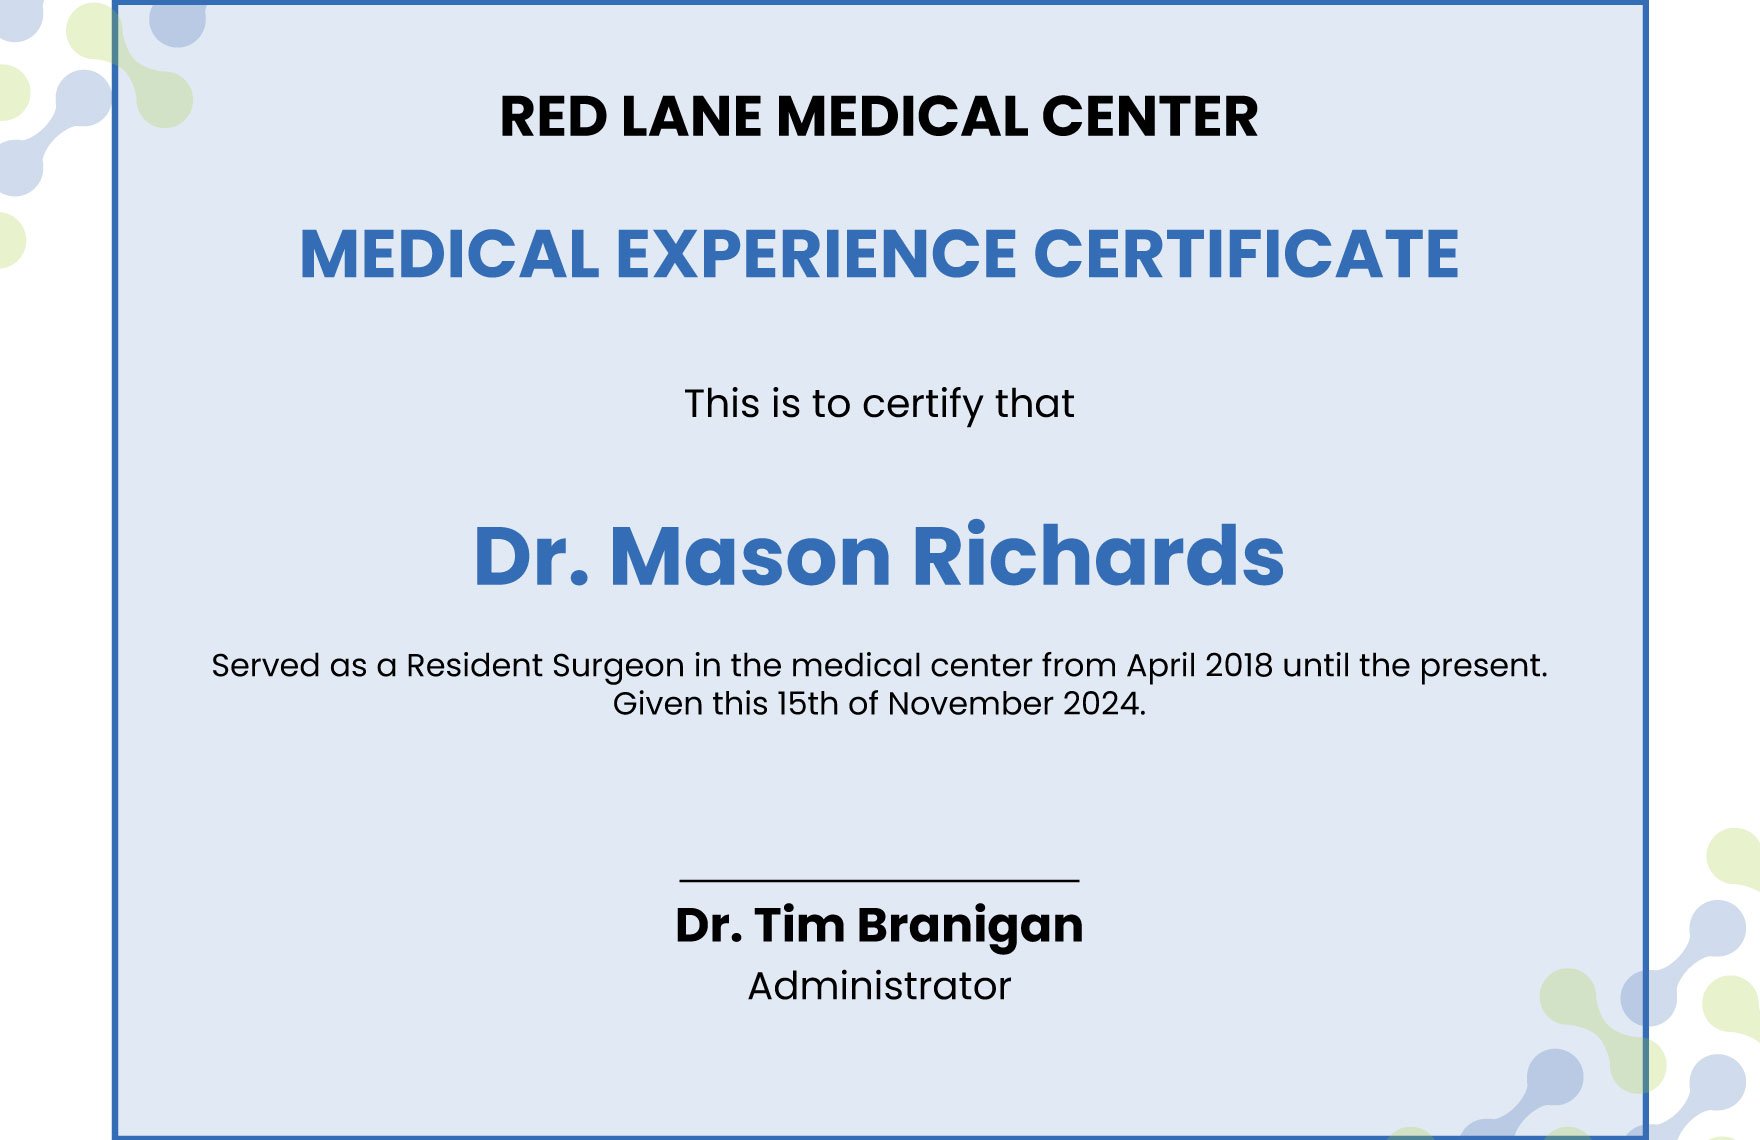 Medical Experience Certificate Template in Word, Google Docs, Illustrator, PSD, Apple Pages, Publisher